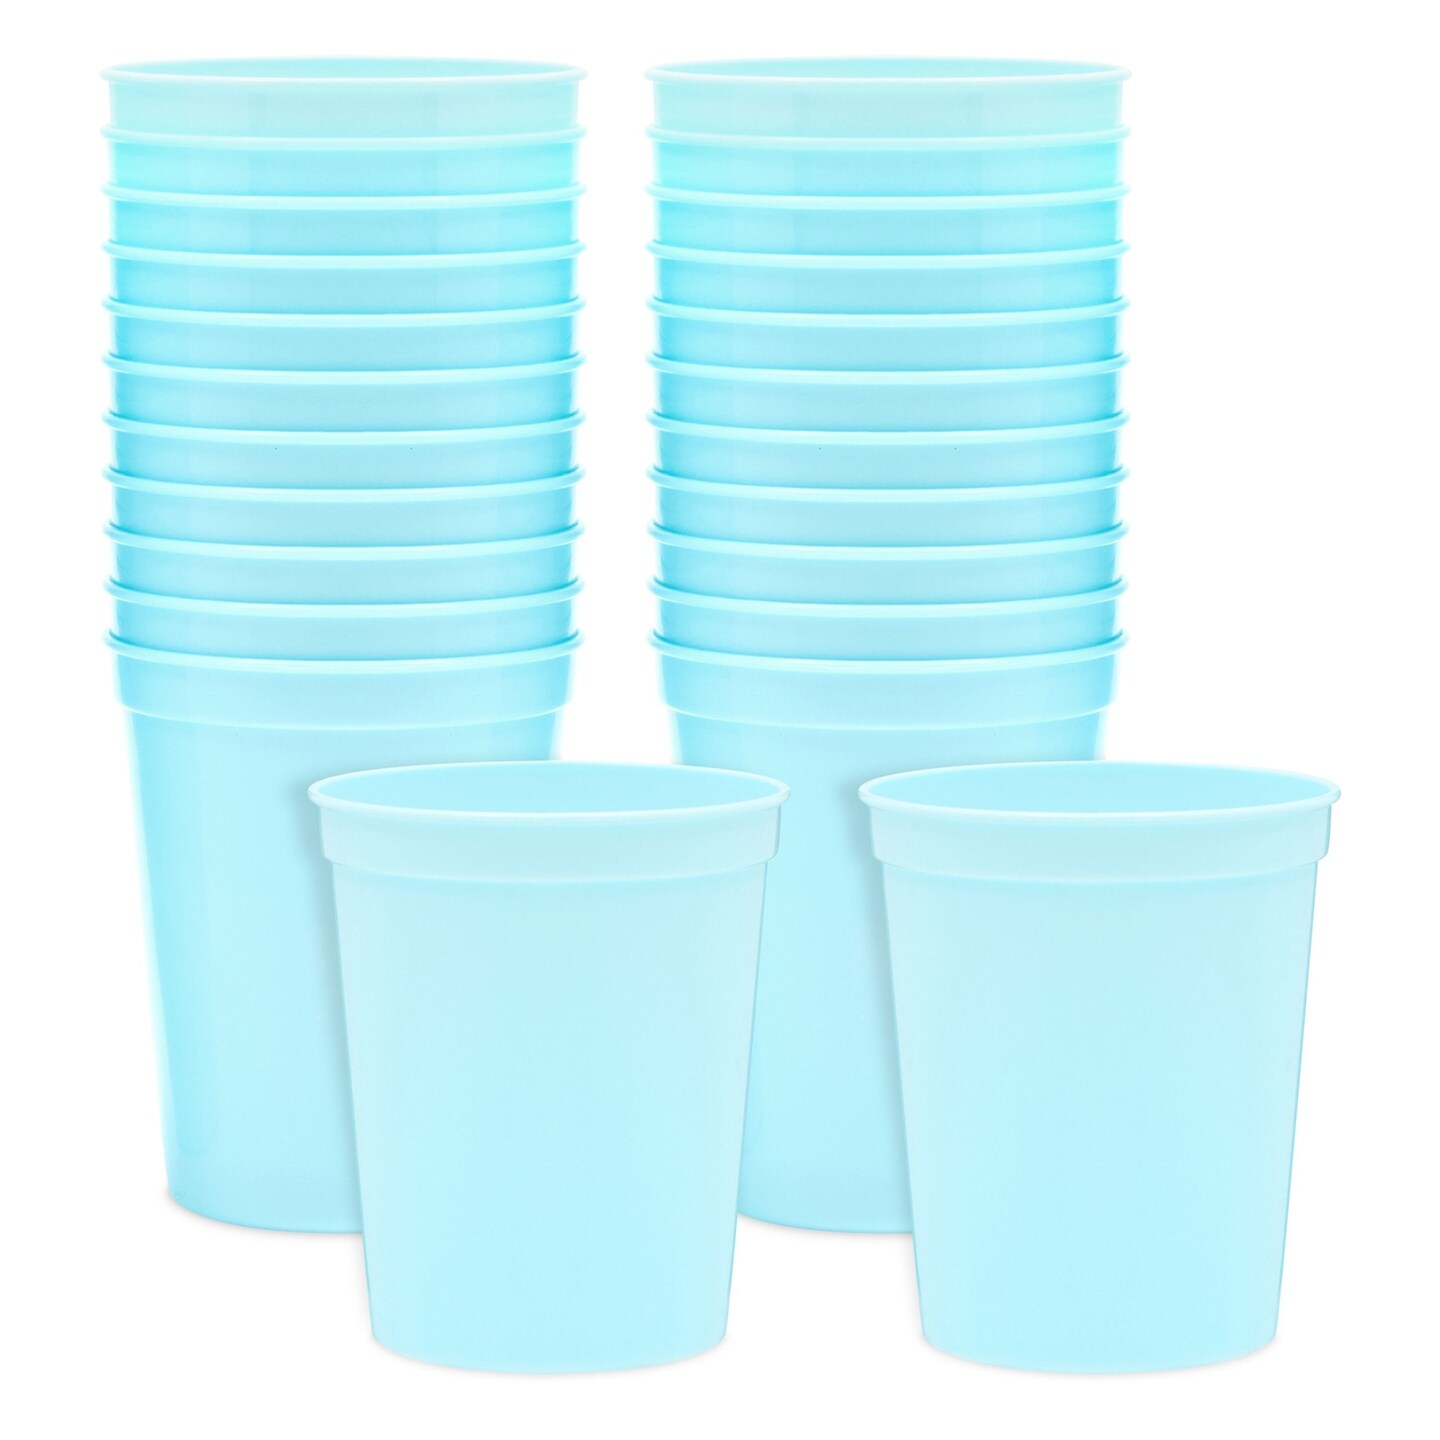 Basicwise Plastic Reusable Cups 7 oz Set of 6 (2 Red, 2 Green, 2 Blue)